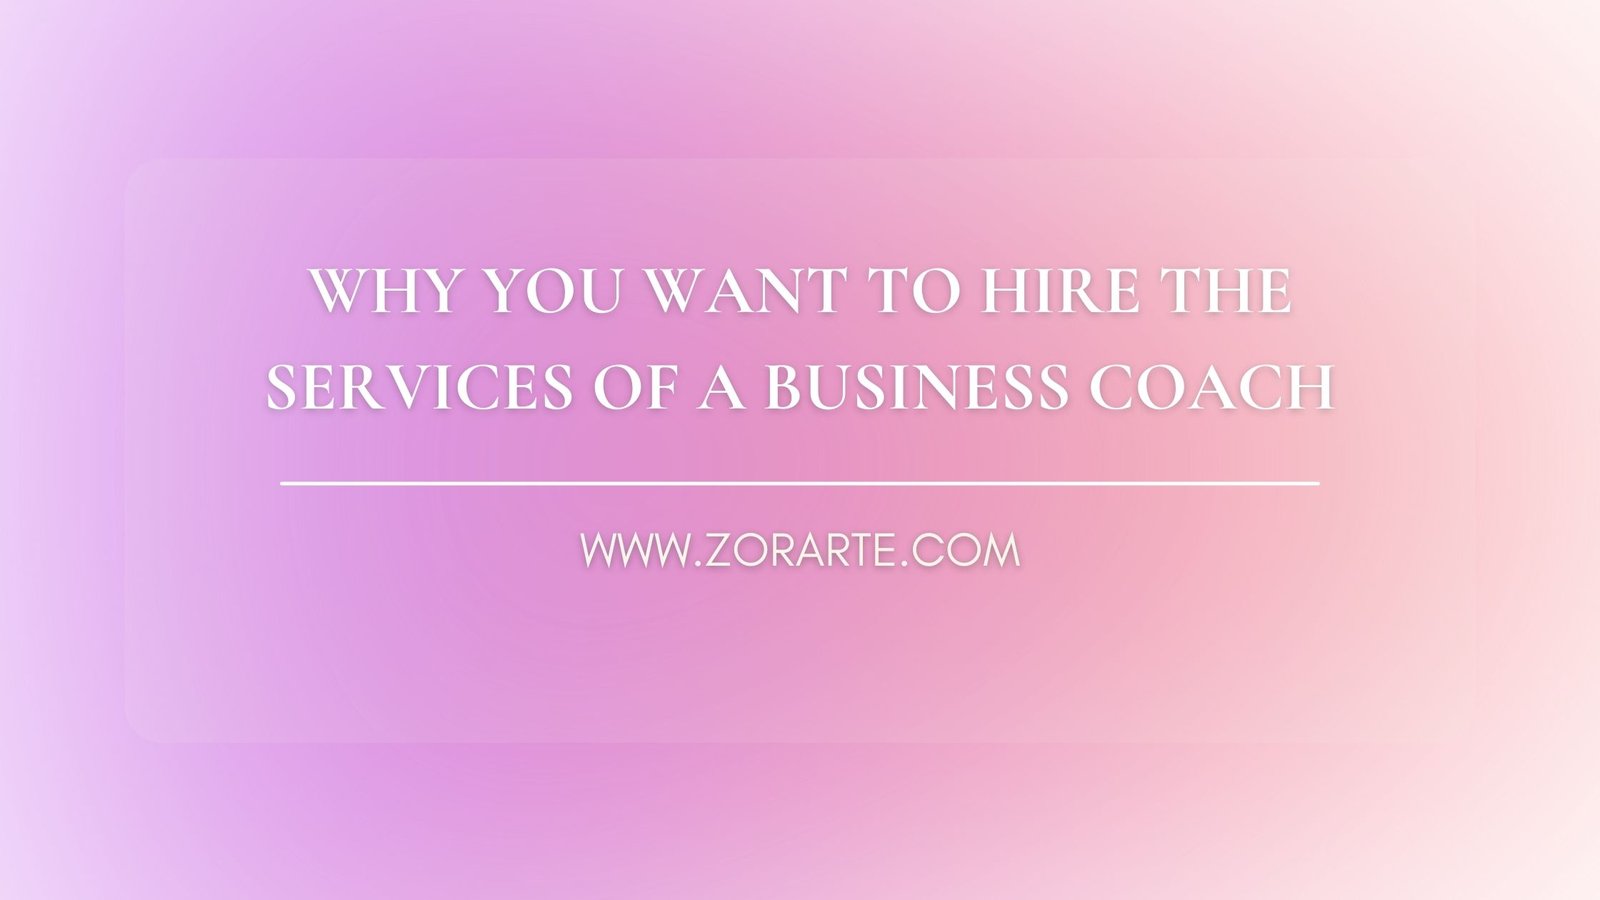 Why You Want to Hire the Services of a Business Coach